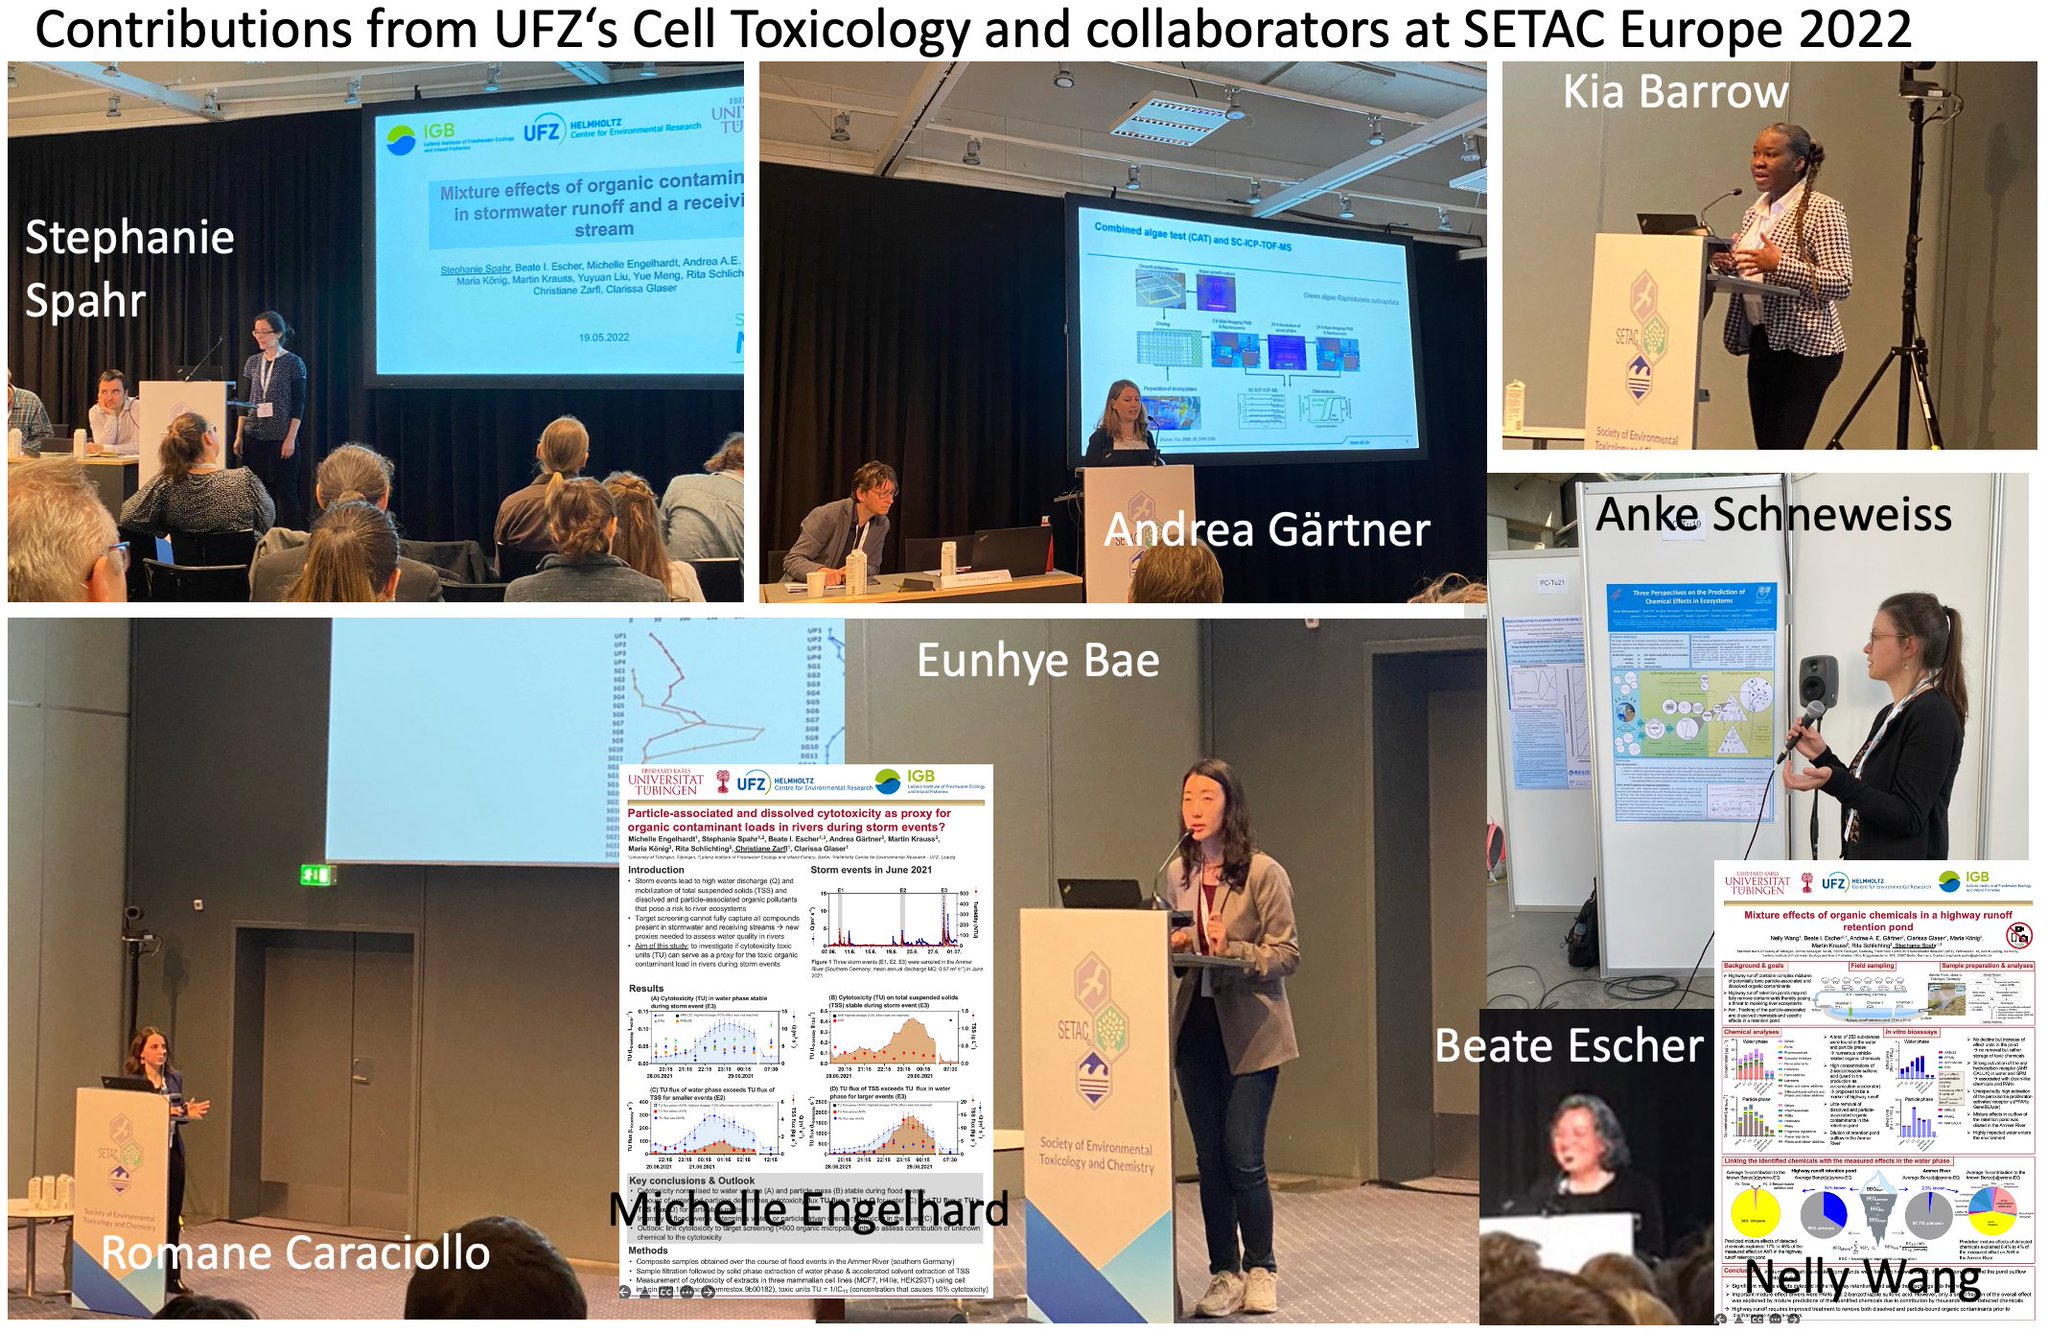 Beate Escher on Twitter: "Awesome contributions of UFZ's Department of Cell Toxicology (and friends) at #SETACCopenhagen. good to catch up in person https://t.co/kcgOhoFPOc" / Twitter